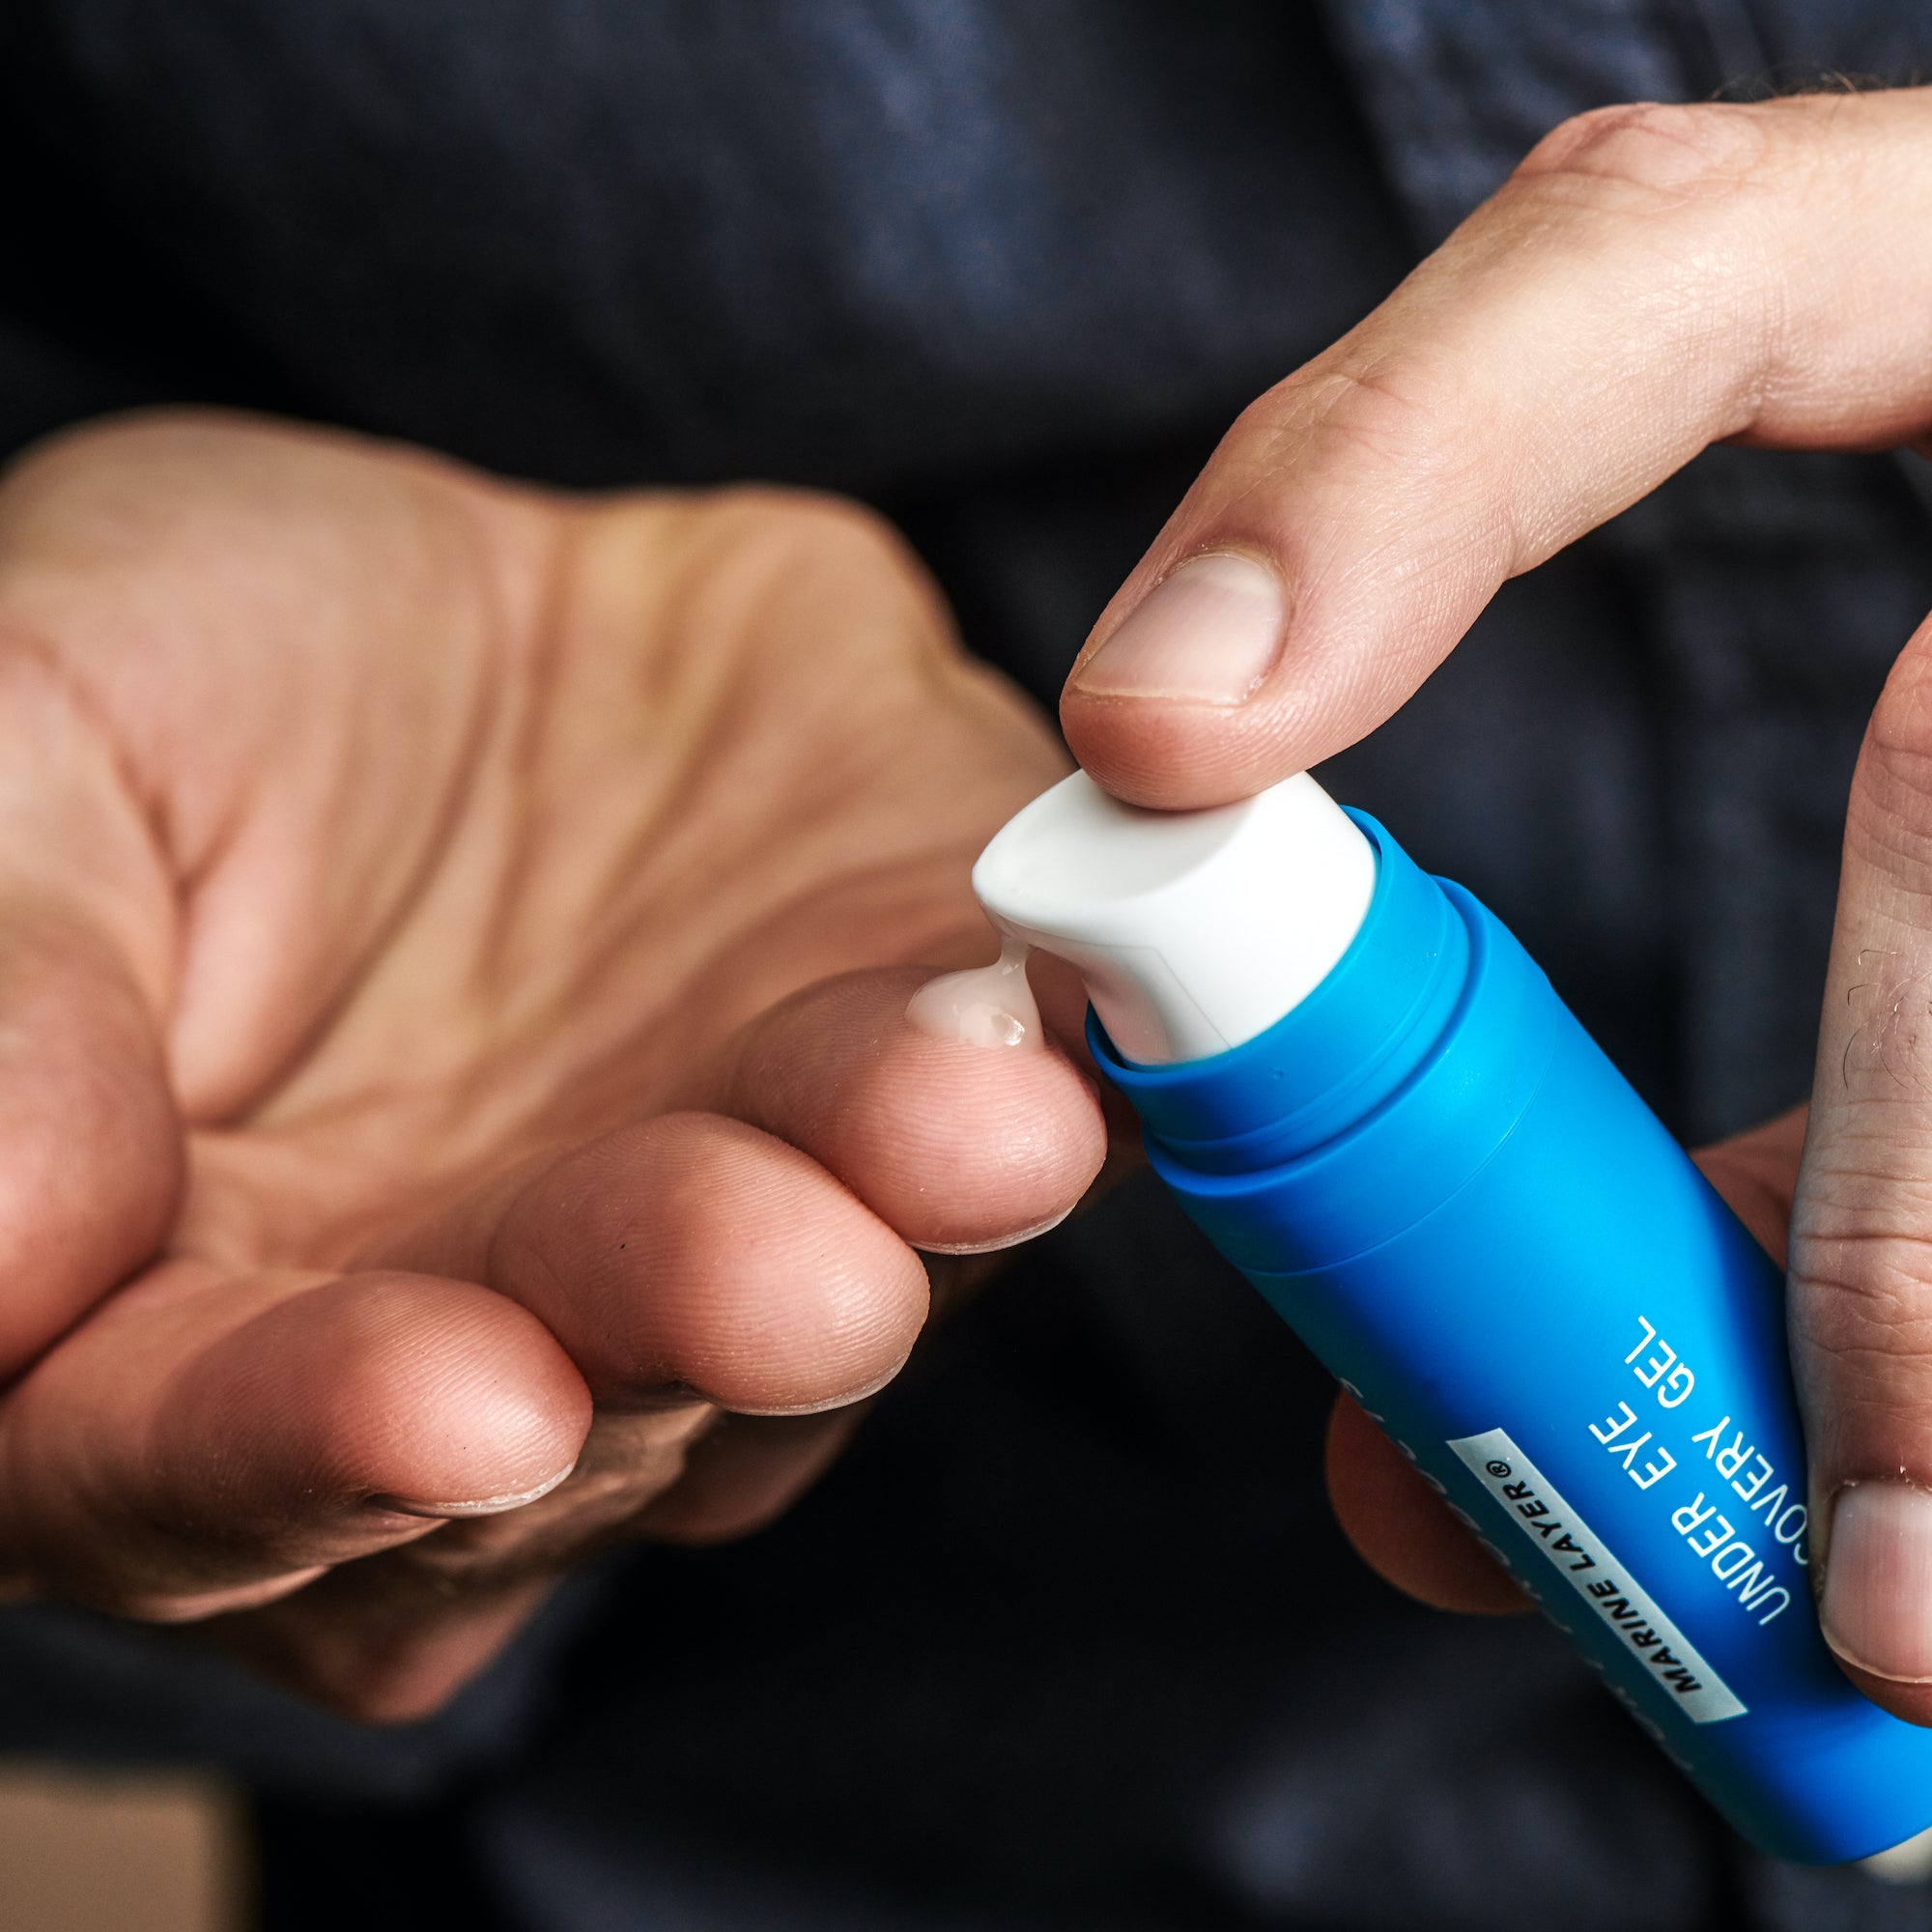 Marine Layer® Under Eye Recovery Gel blue bottle with white pump. Hands pumping liquid from bottle onto fingers